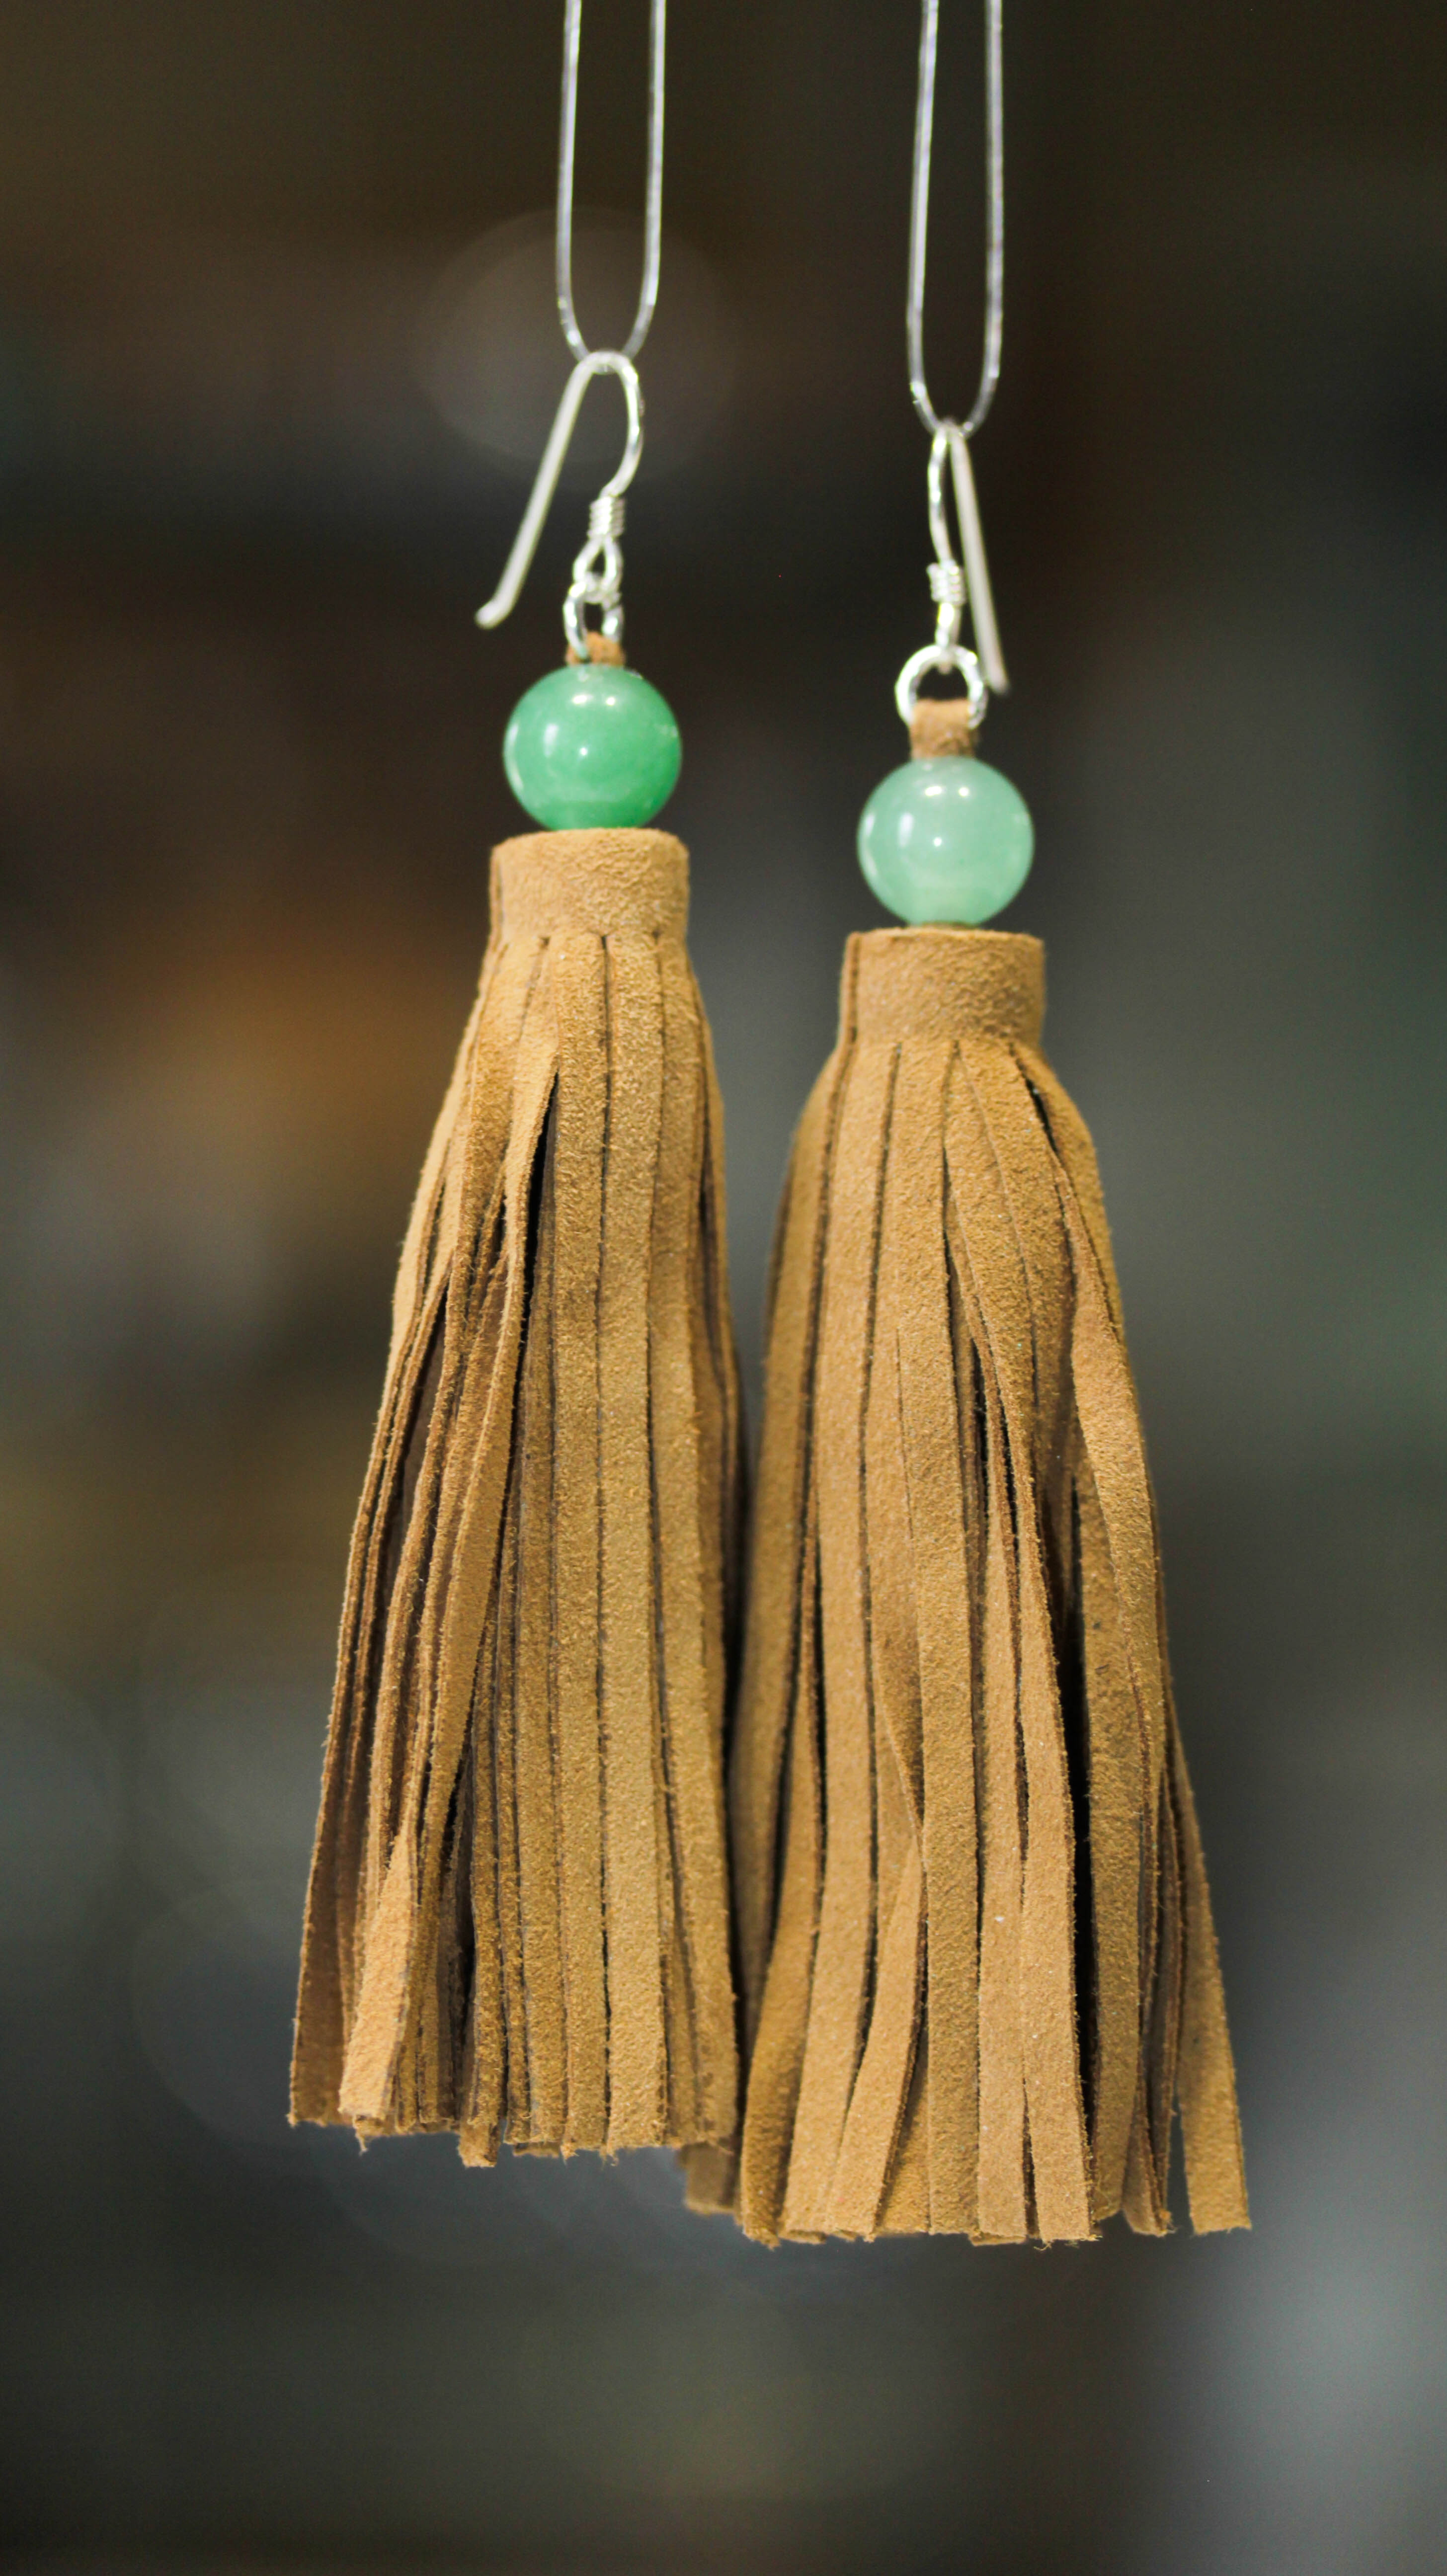 8.5cm Large Camel Suede Leather Tassel - Goody Beads